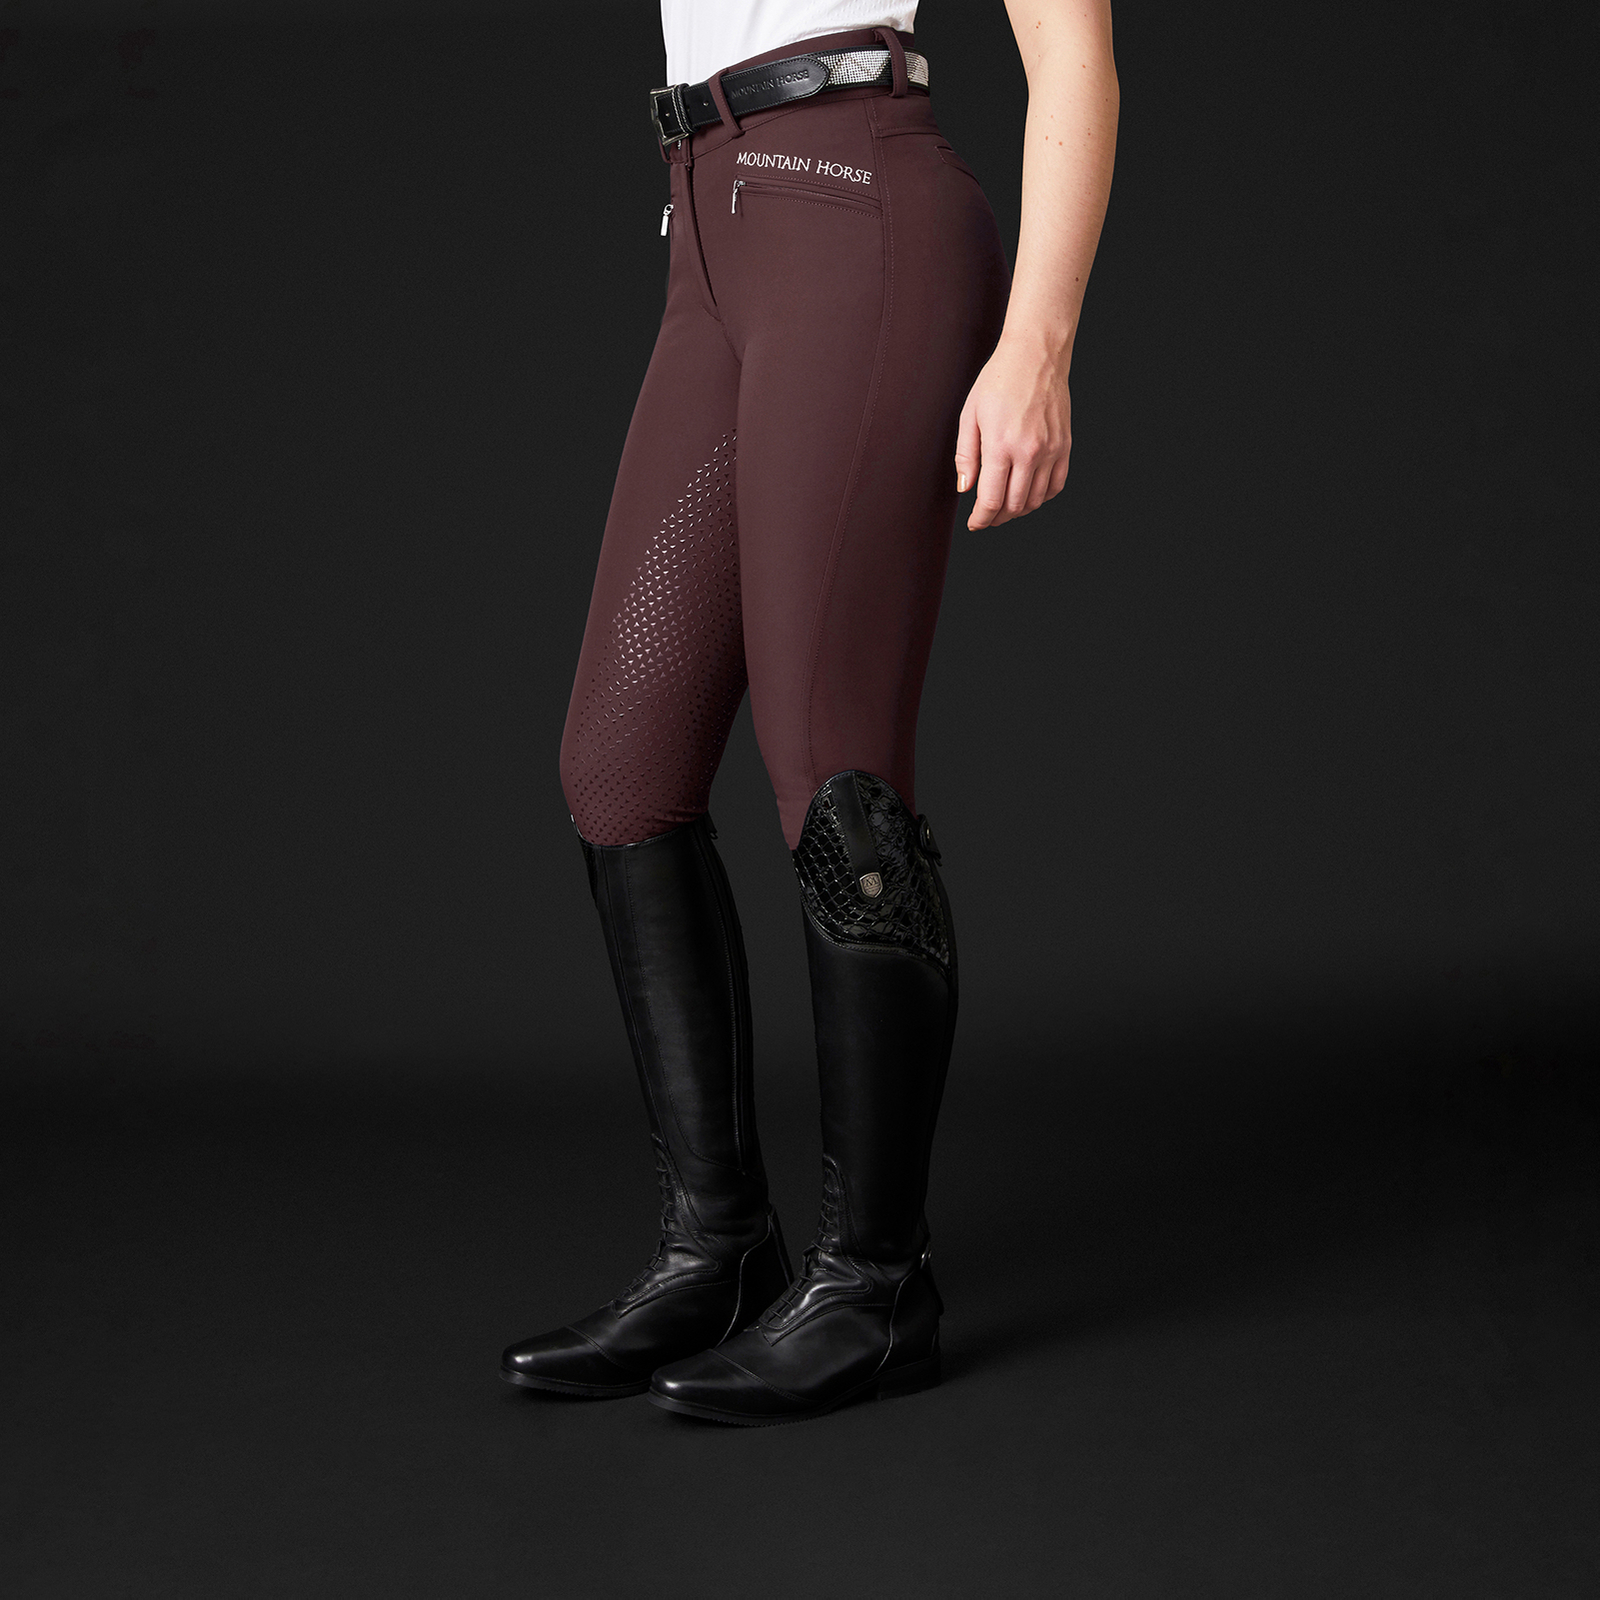 Women's Equestrian Breeches: History, Technology, and Prices